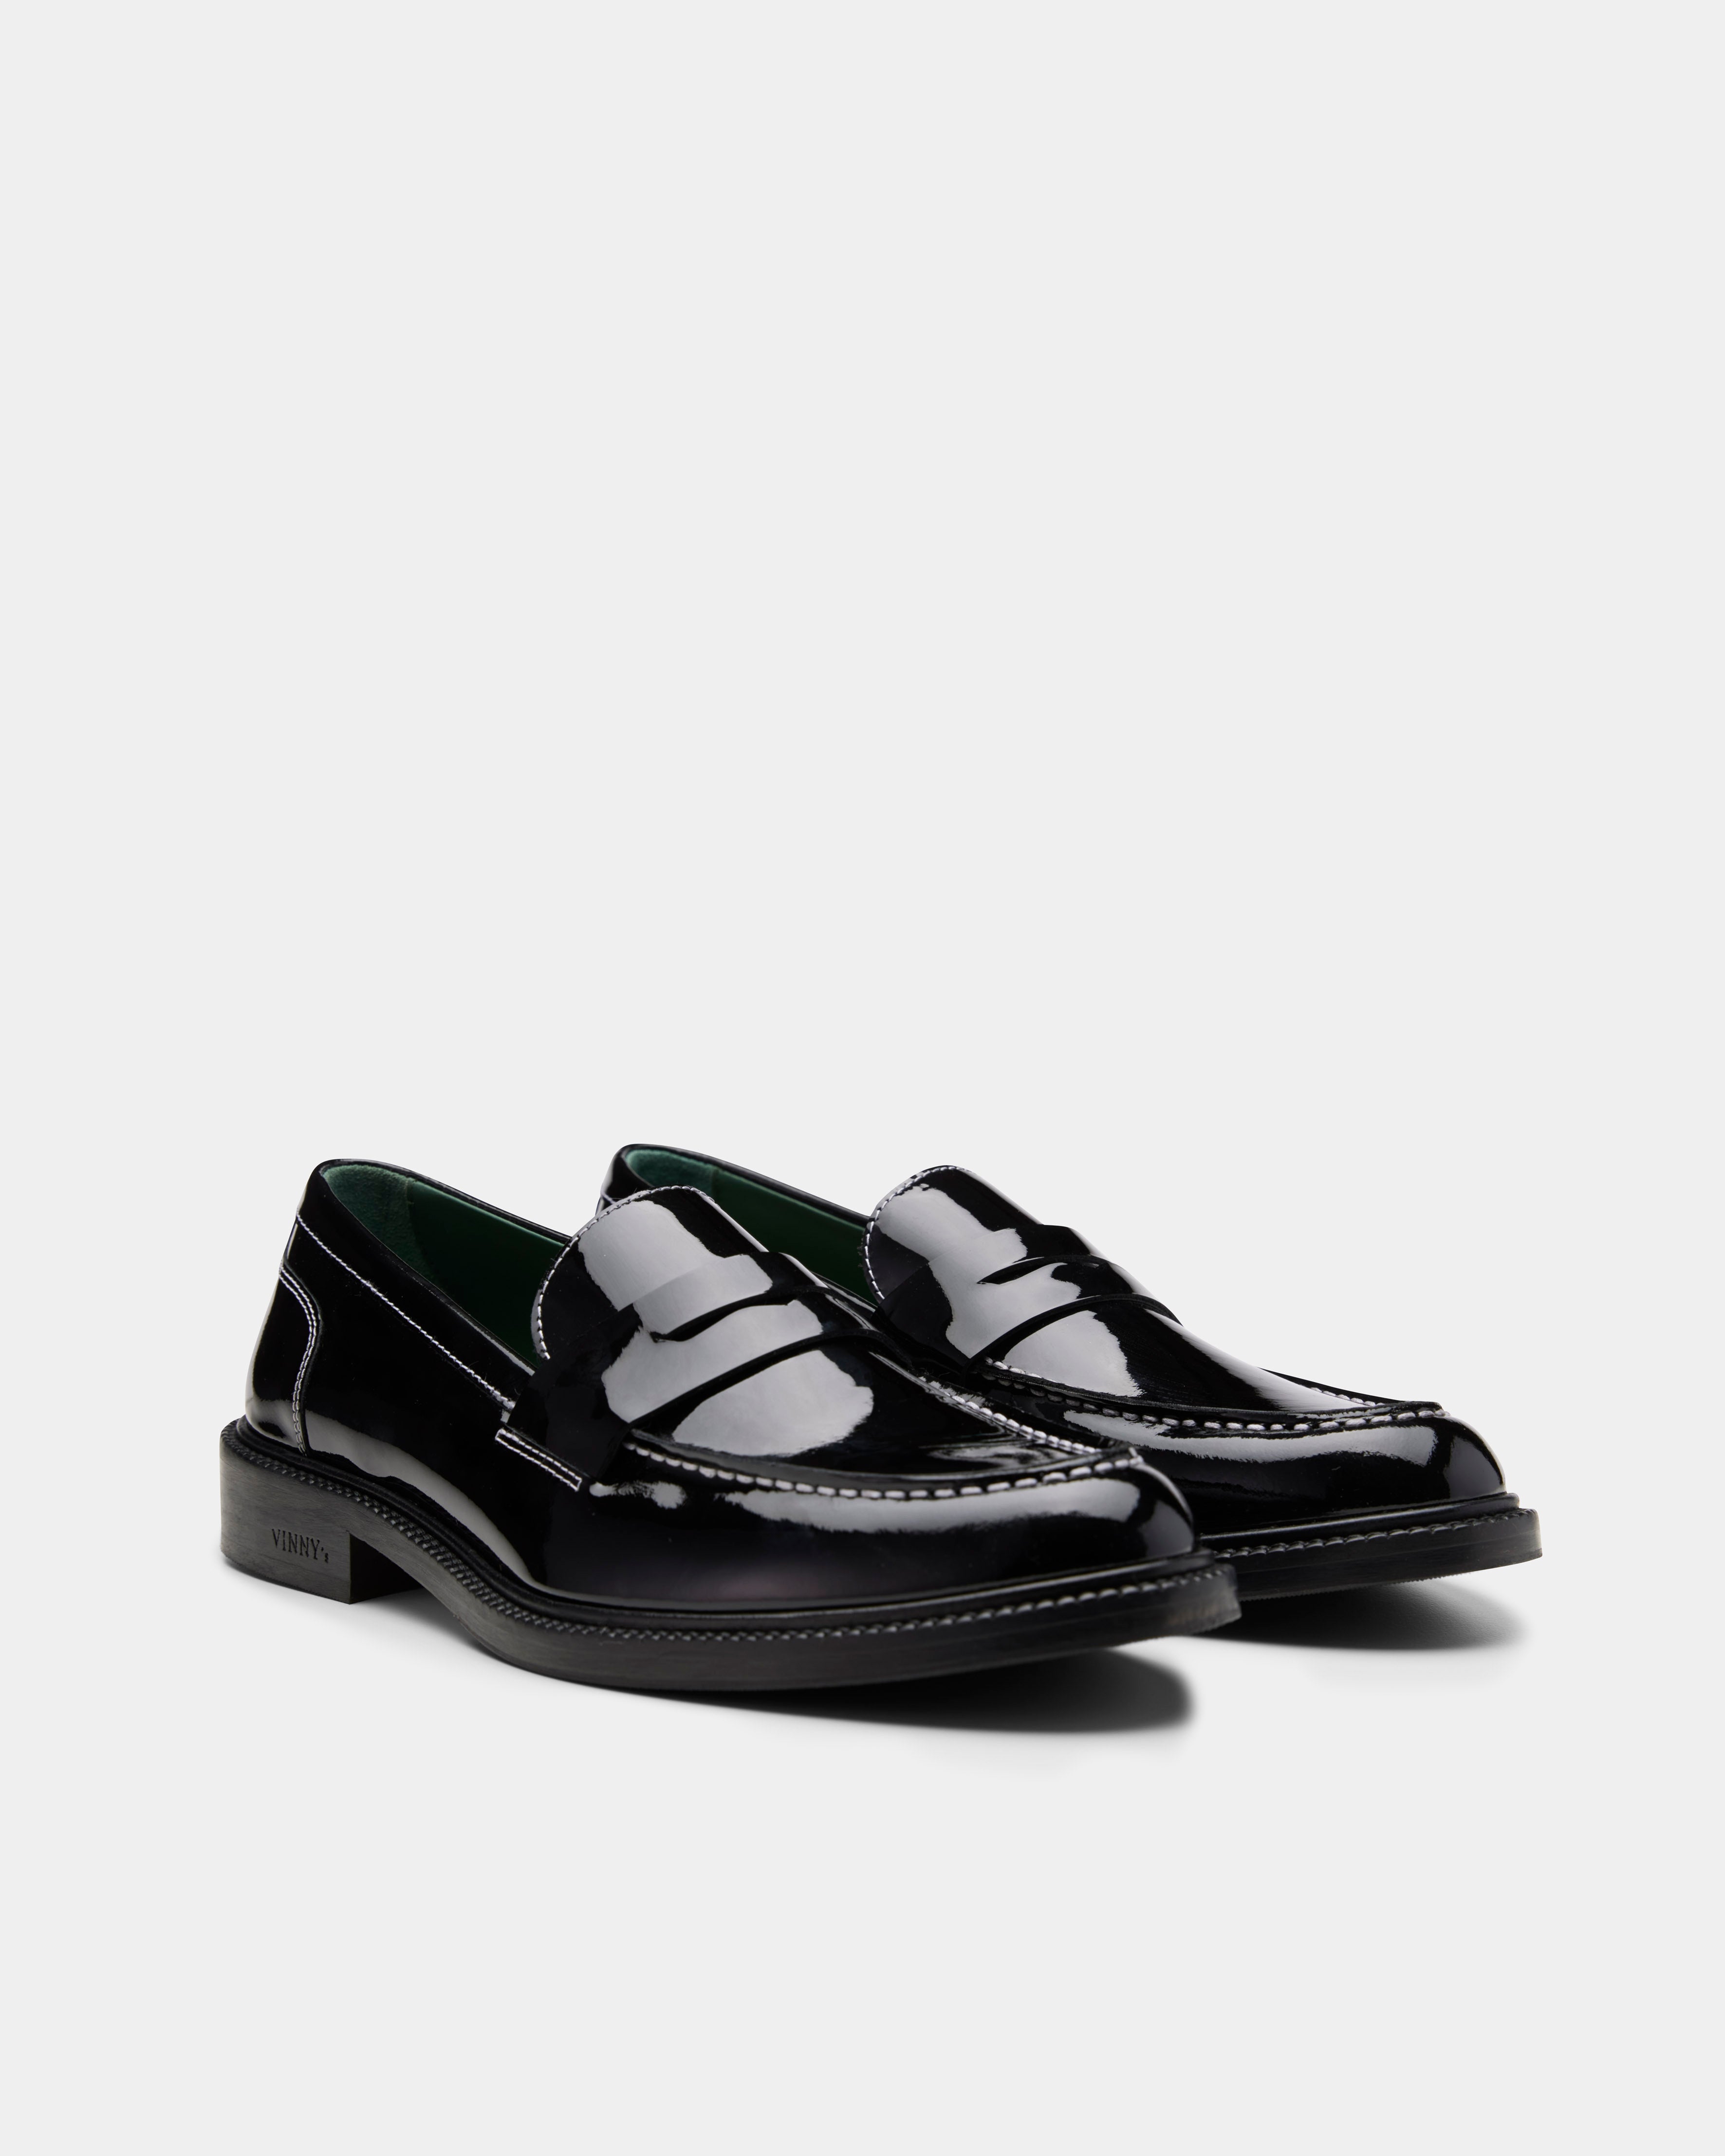 women's loafer in black patent leather